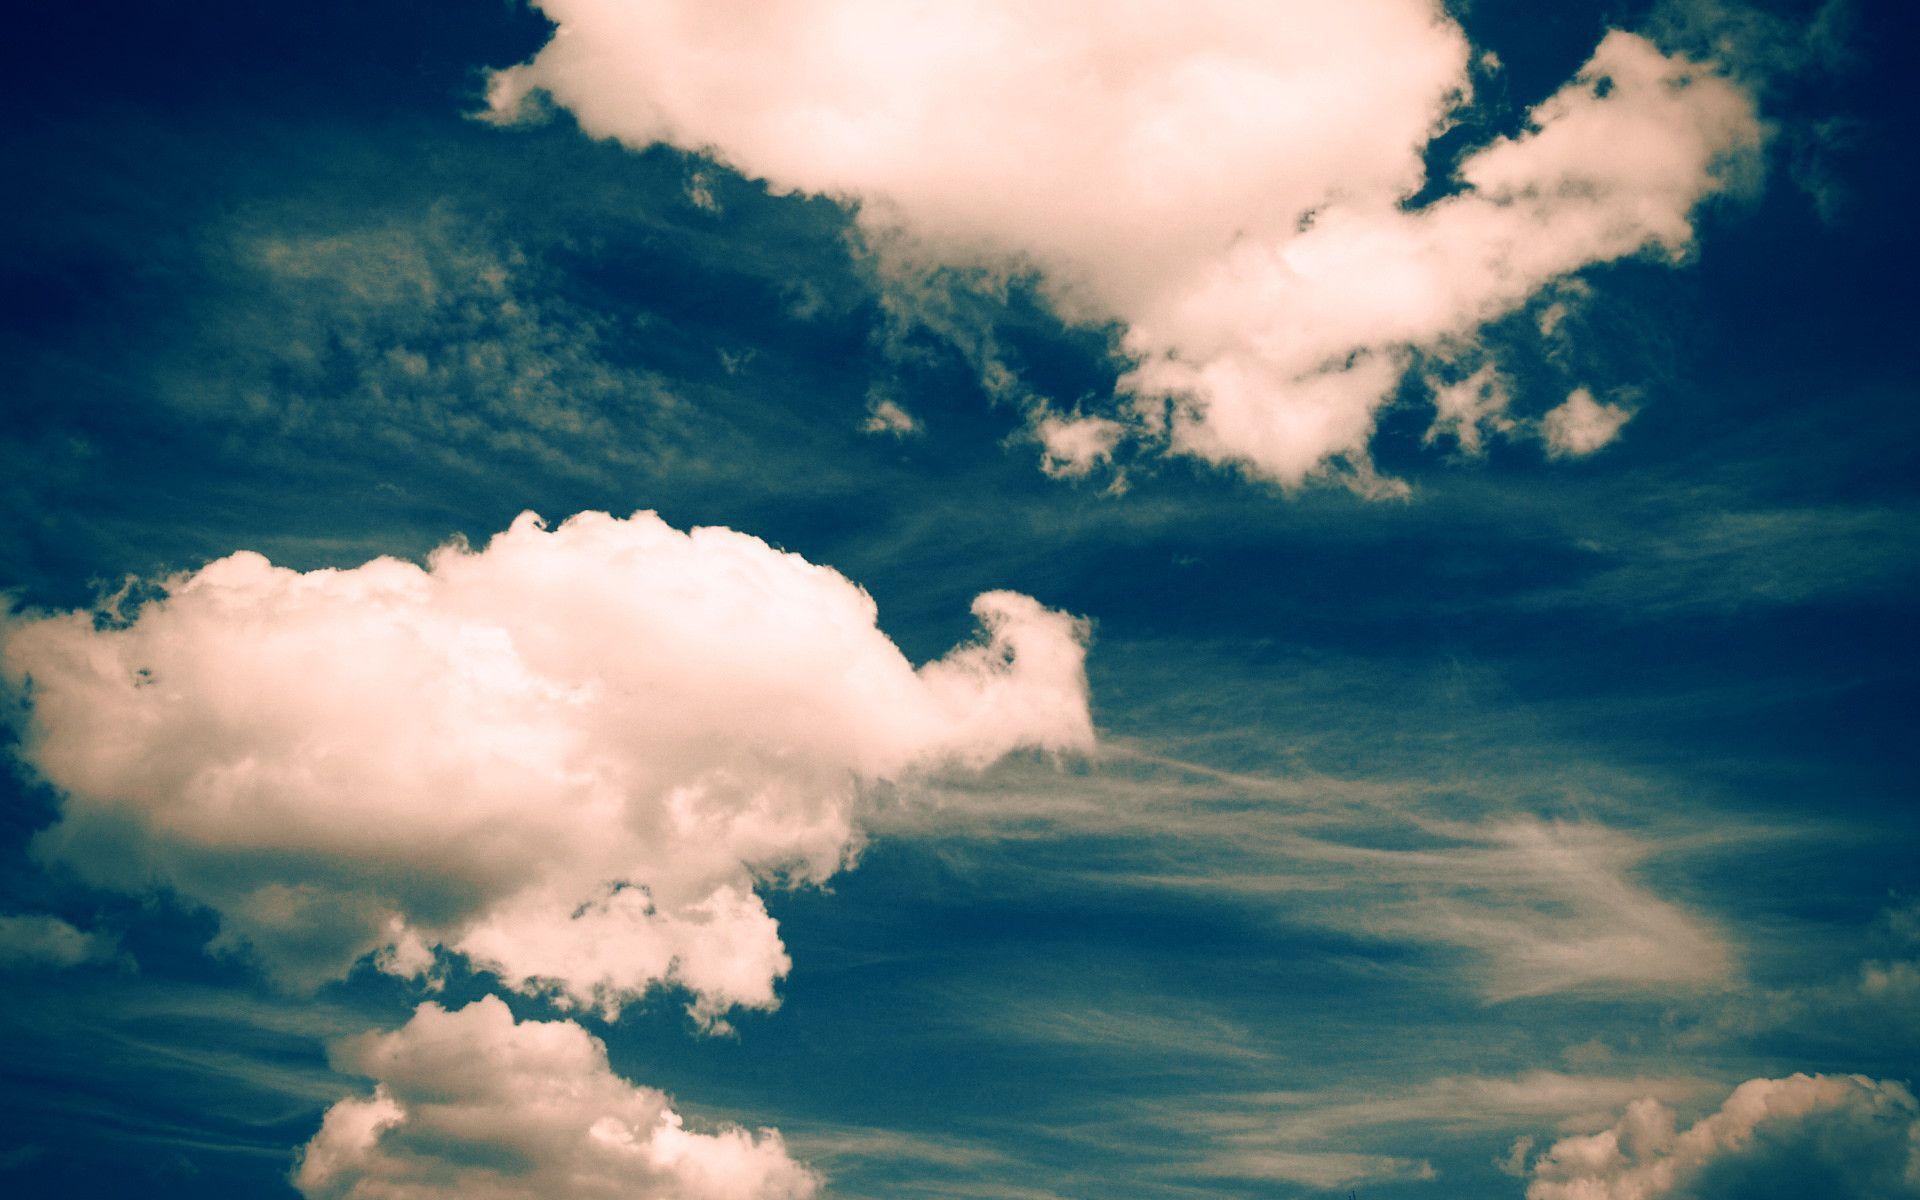 most beautiful cloudly sky background HD wallpaper 920 x 1200